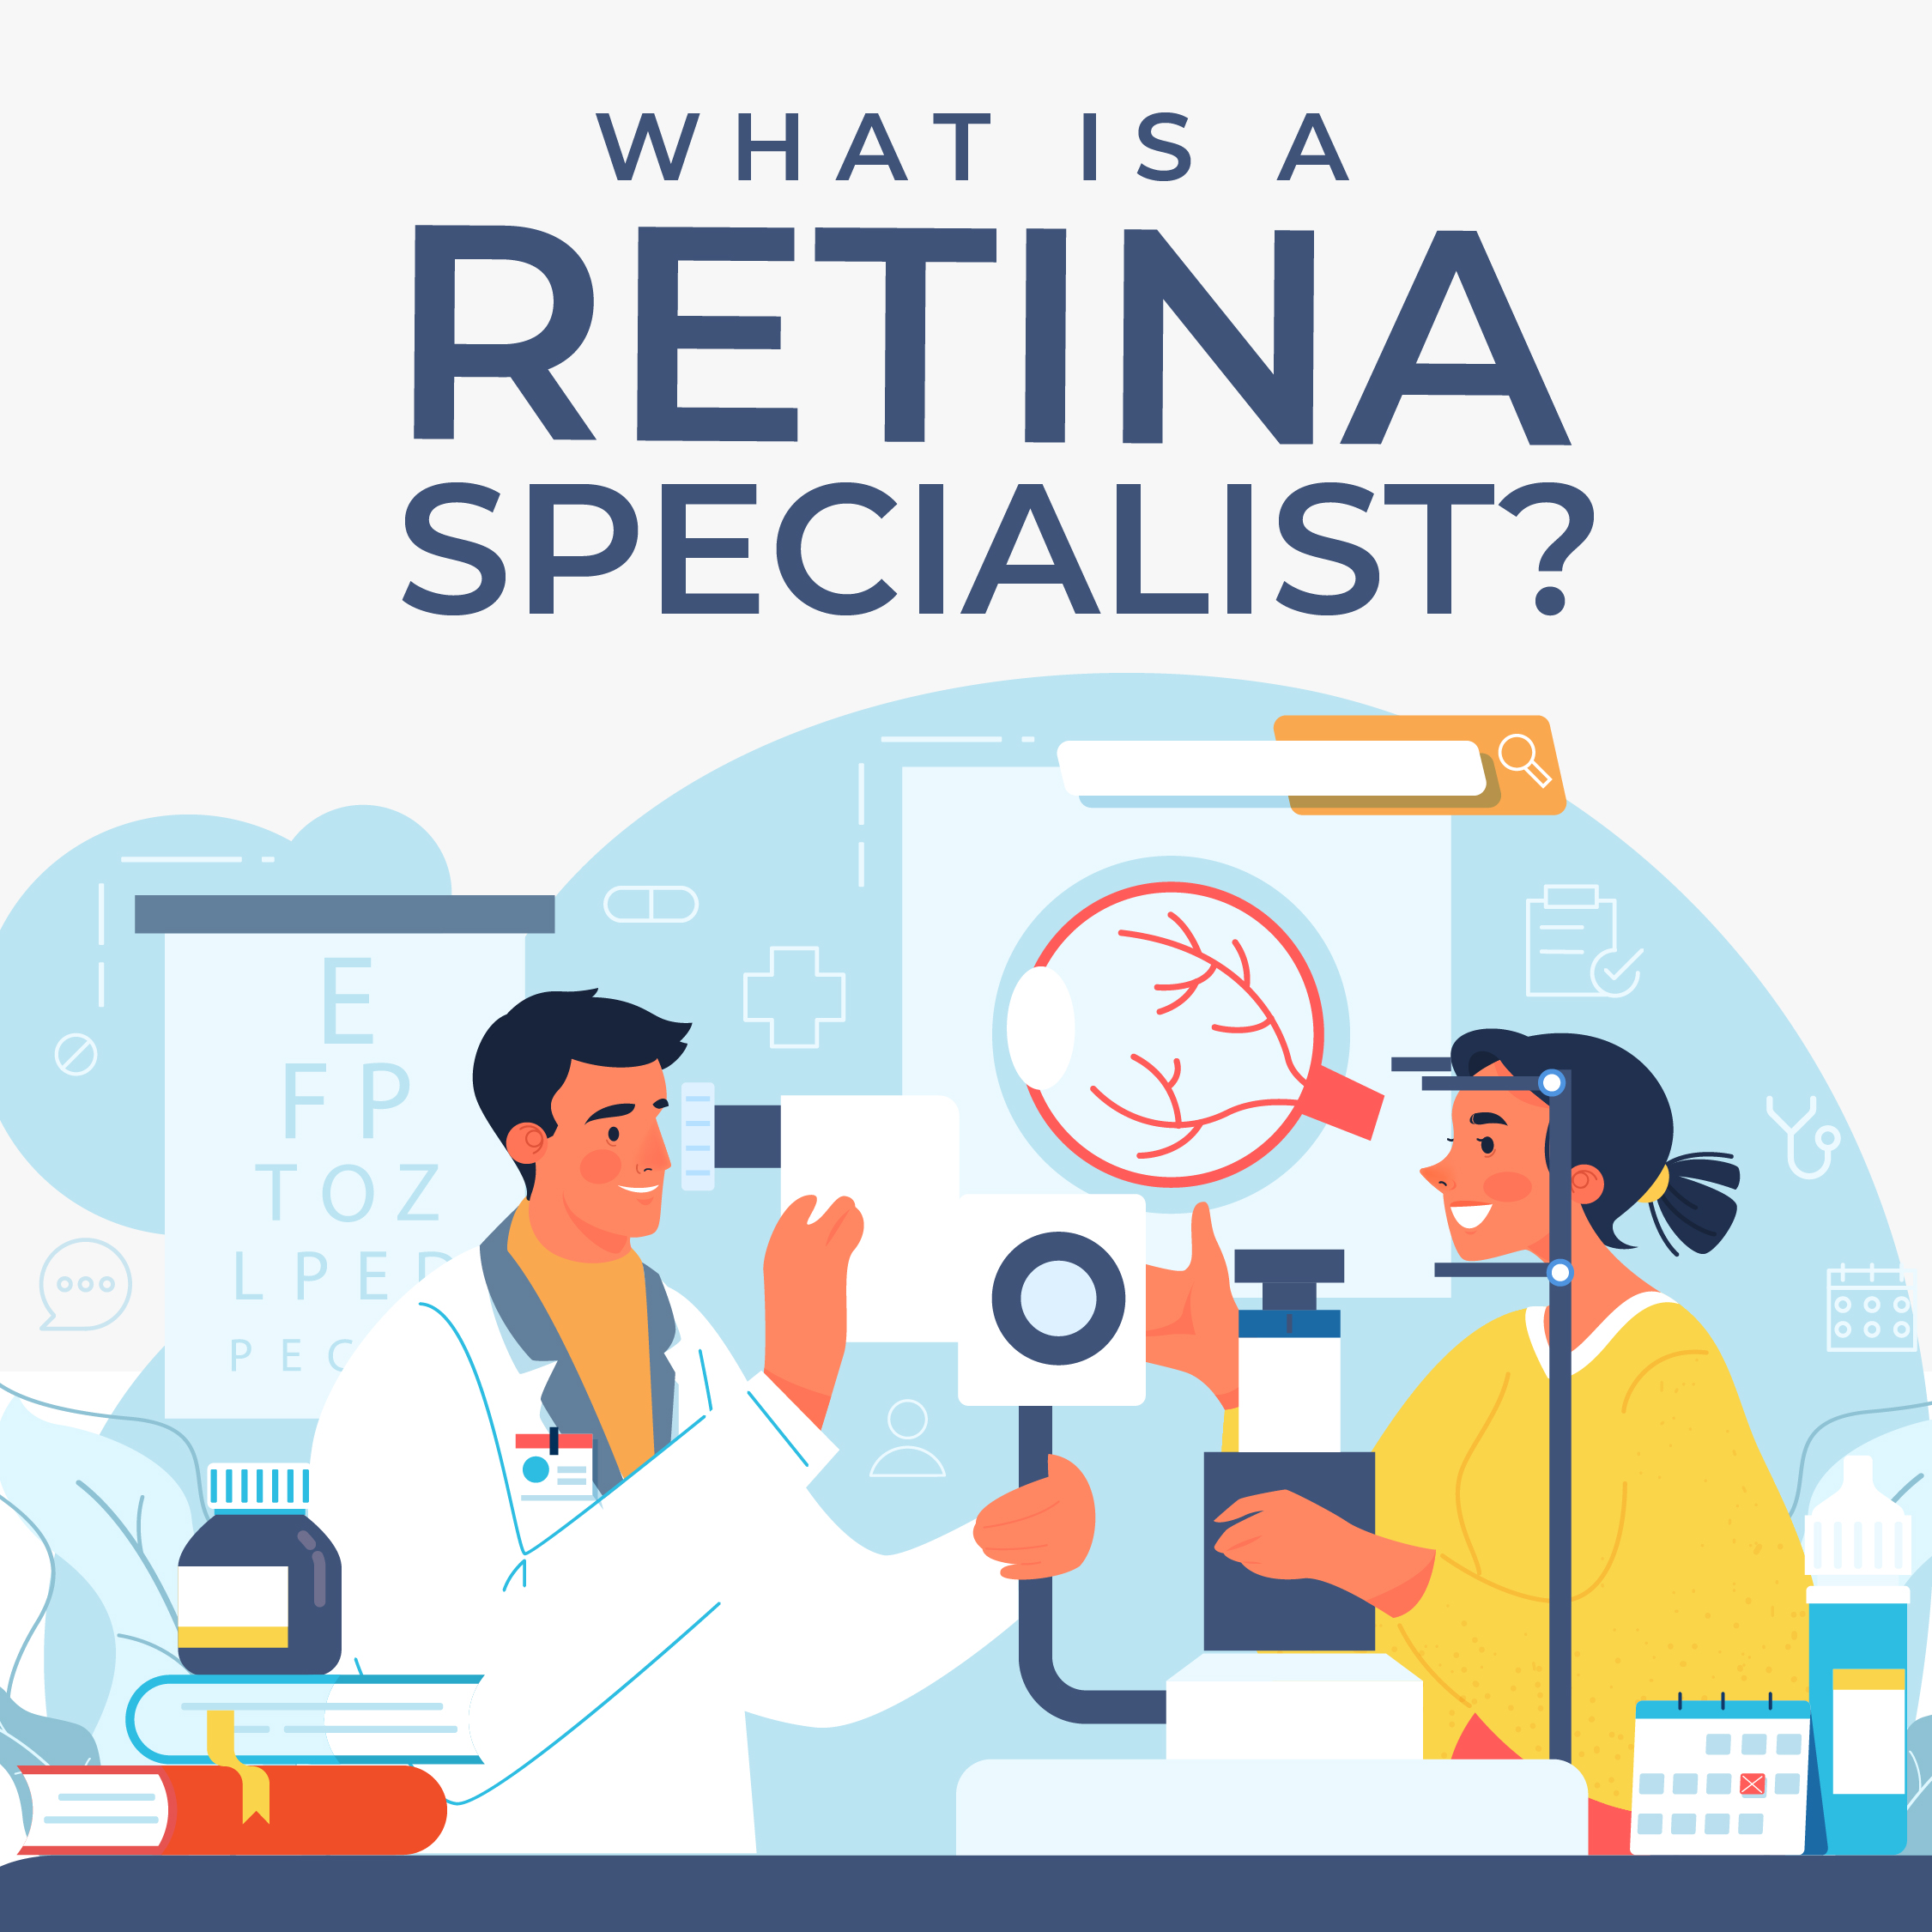 An illustration from the infographic "What is Retina Specialist?"